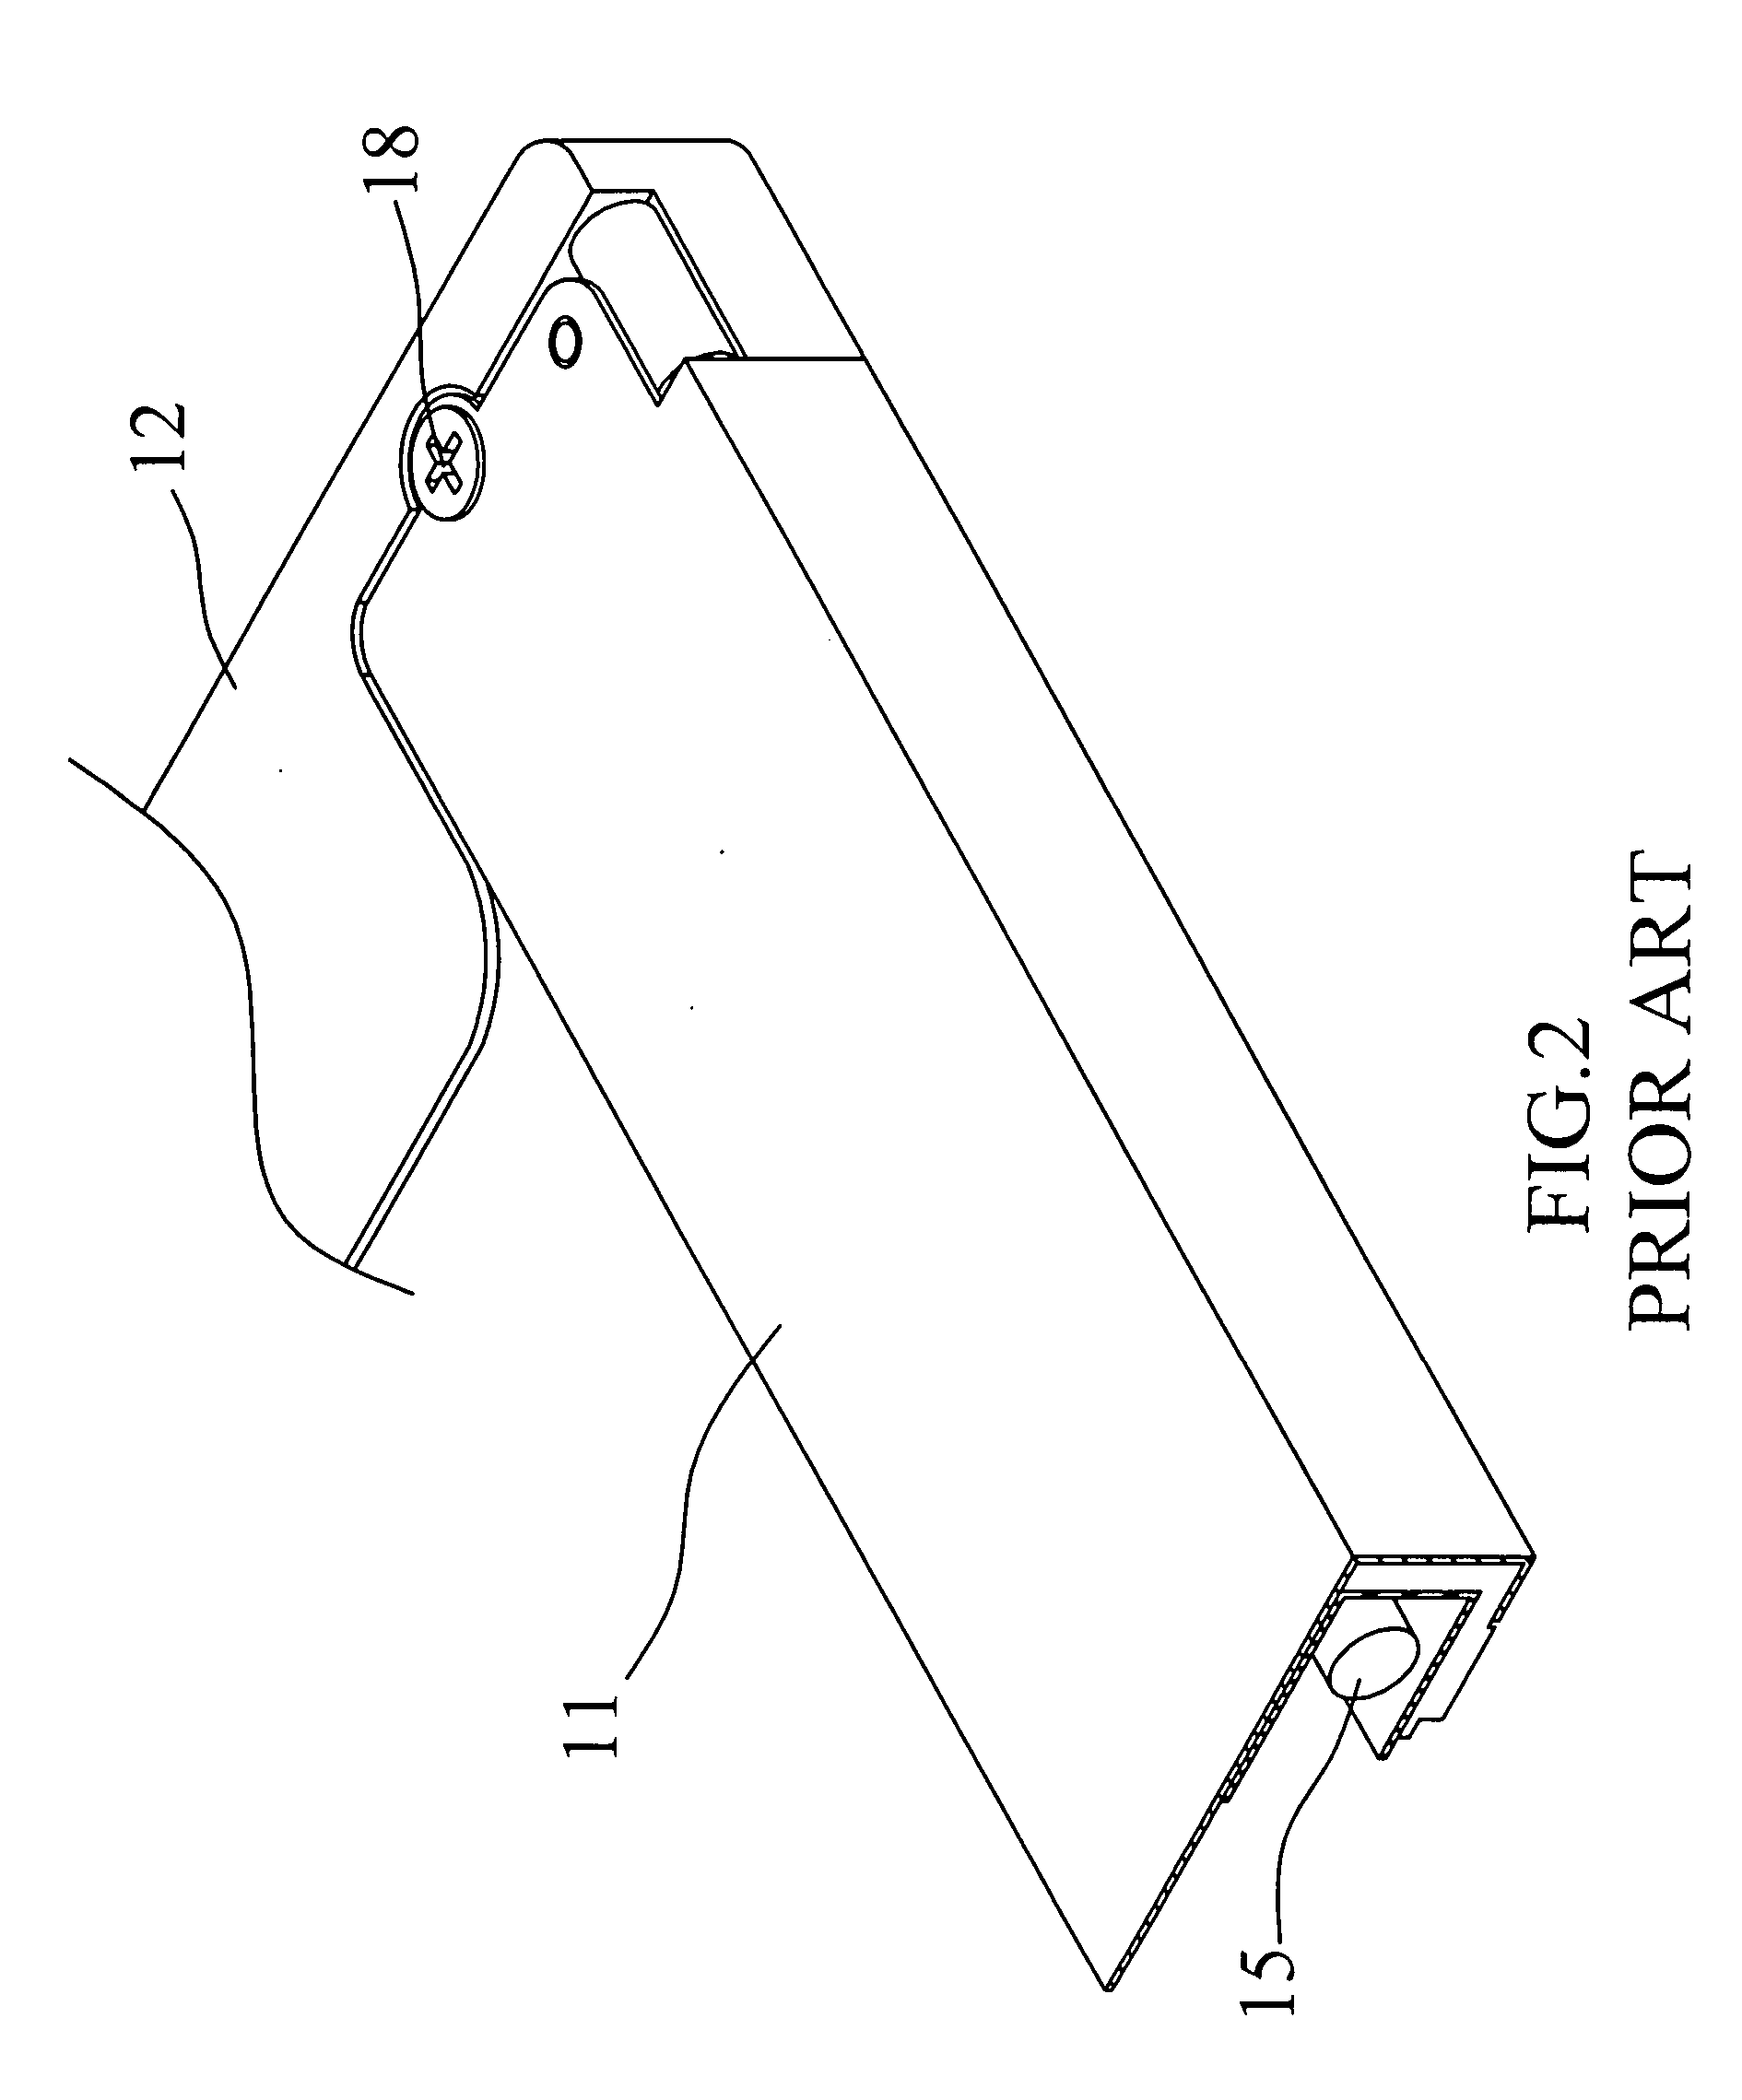 Backlight module locating device and method thereof